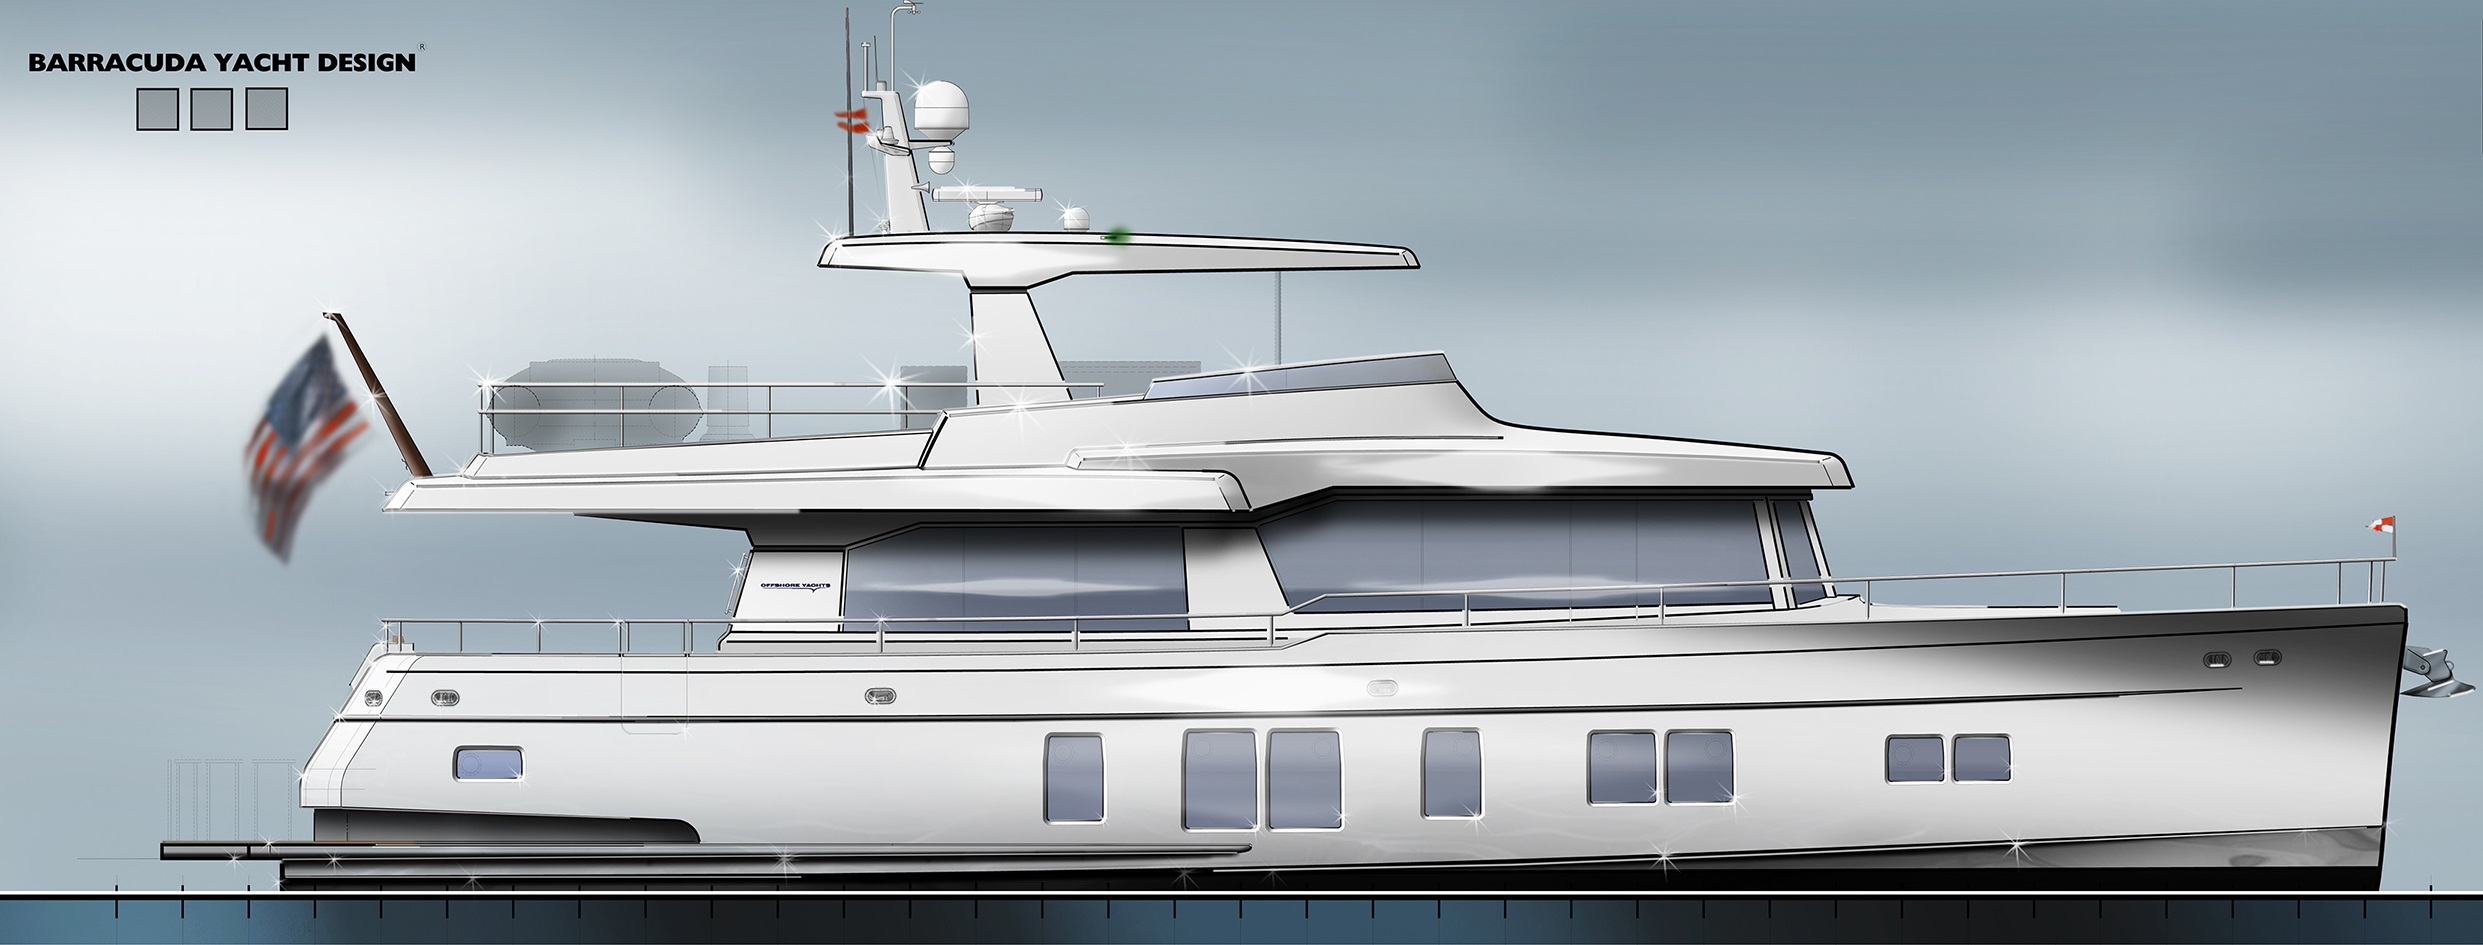 Offshore Yachts CE Series, Barracuda Yacht Design